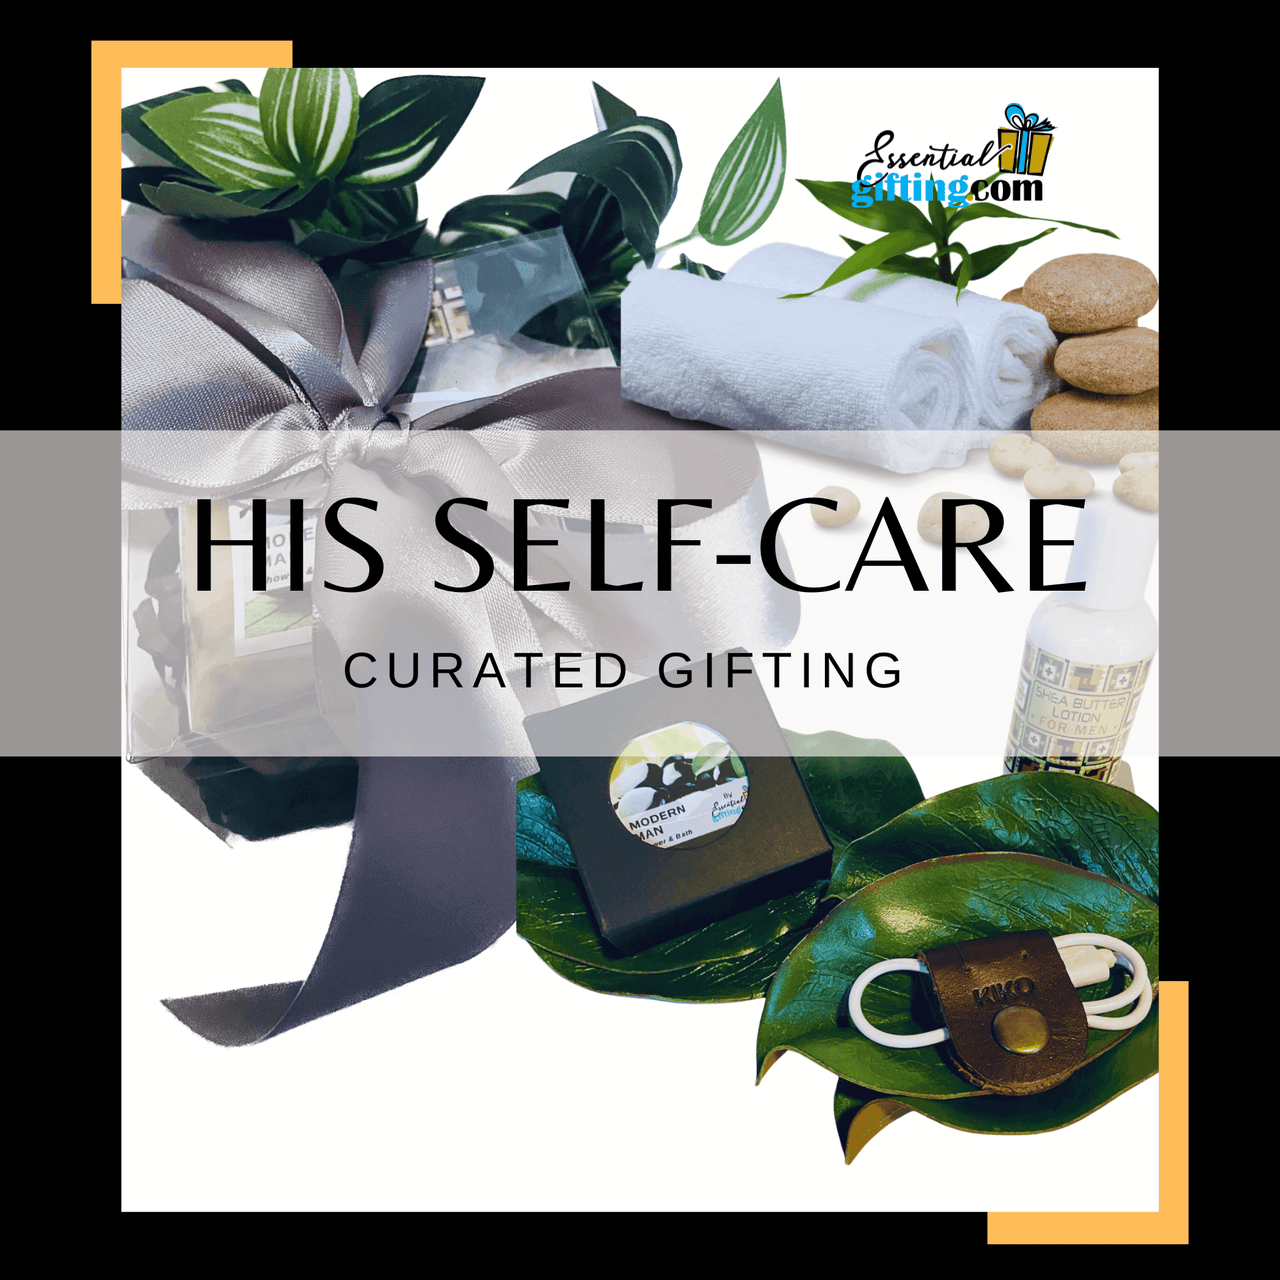 Thoughtful $20 self-care gift box with calming plants, cozy towel, and relaxation items.